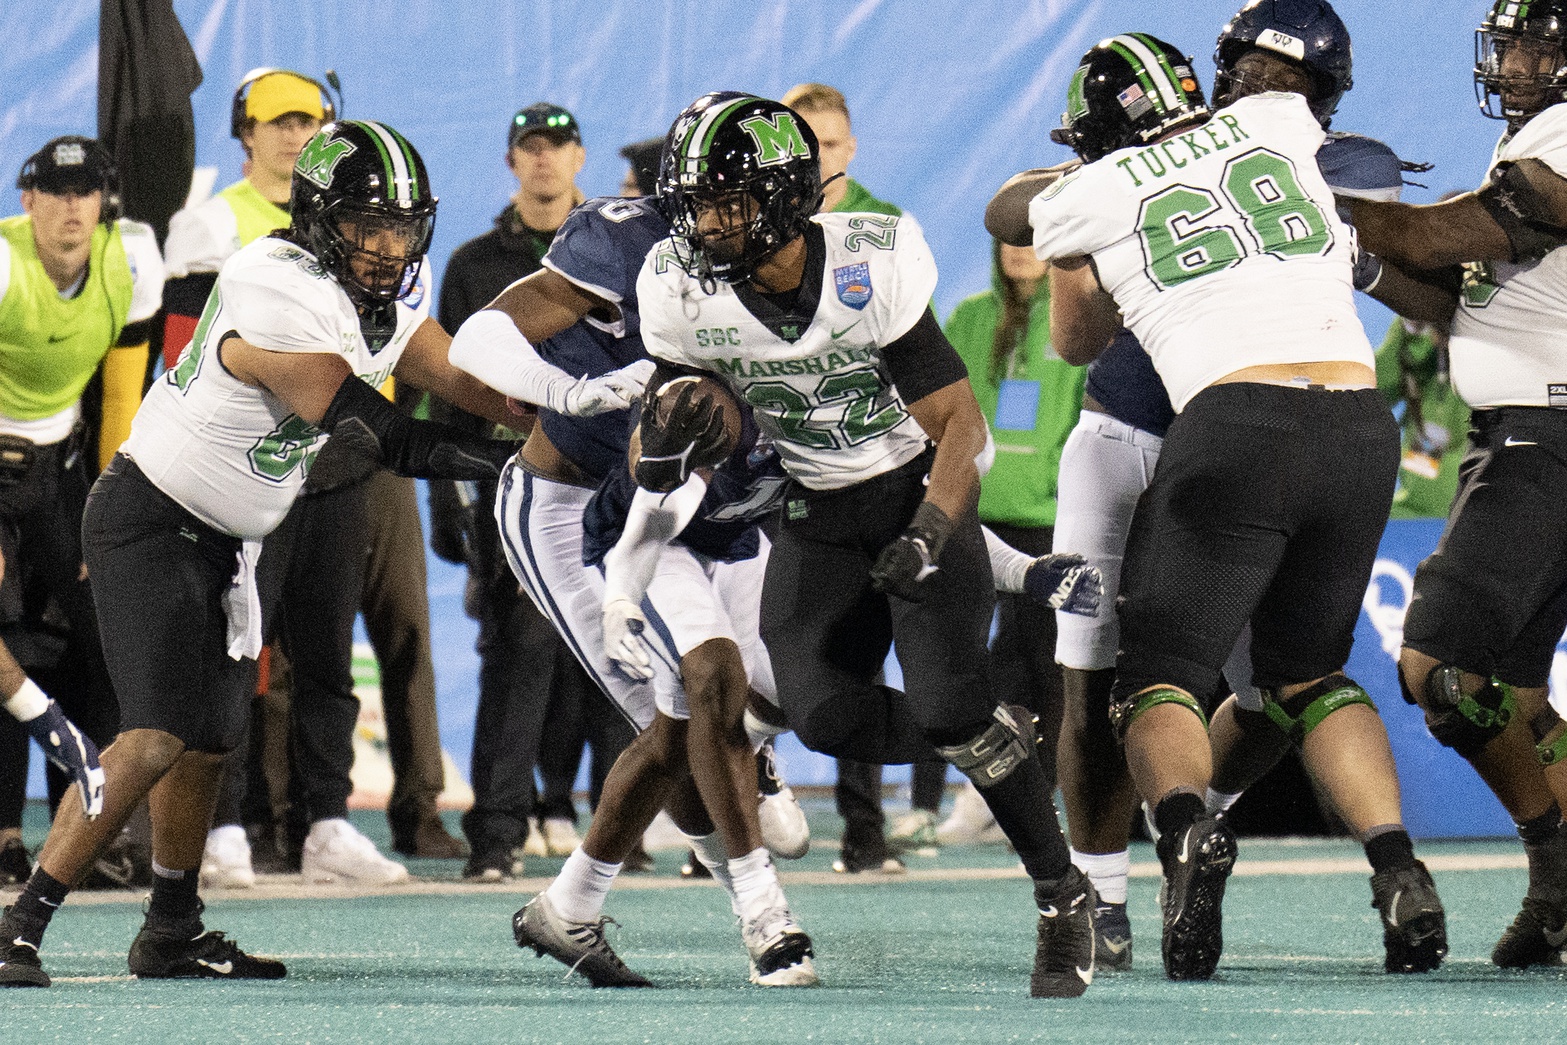 Marshall Thundering Herd Preview Roster, Prospects, Schedule, and More